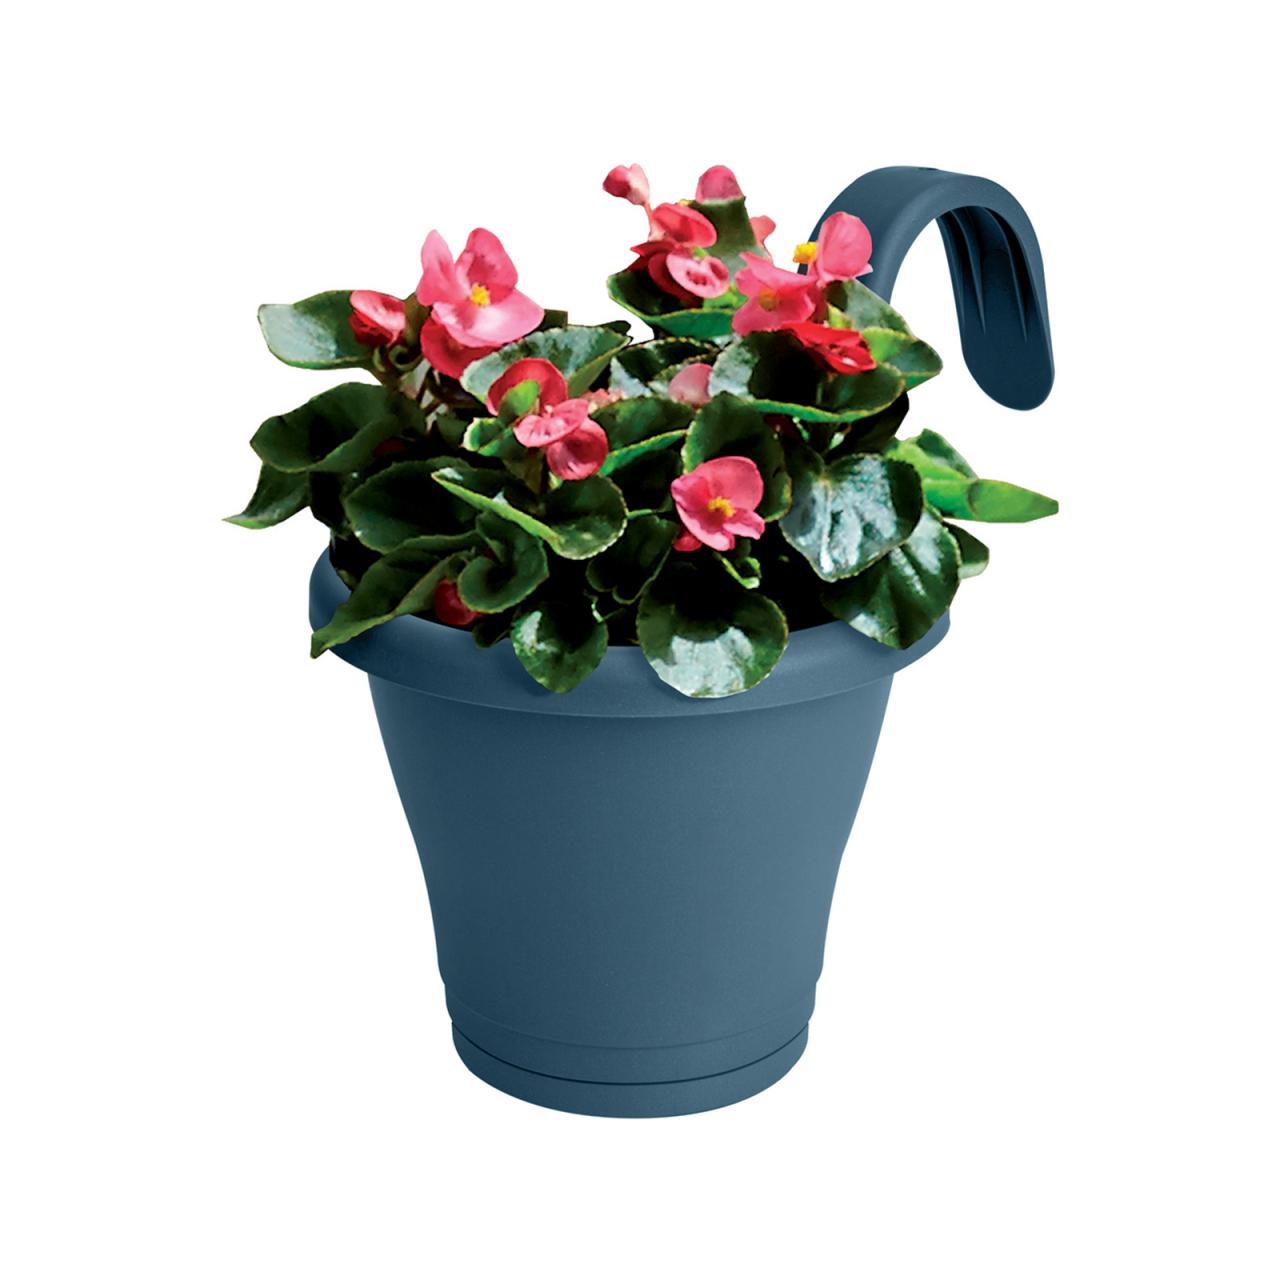 Hanging Plants Indoor | Balcony Hanging Pots: Enhance Your Outdoor Space with Bunnings' Collection